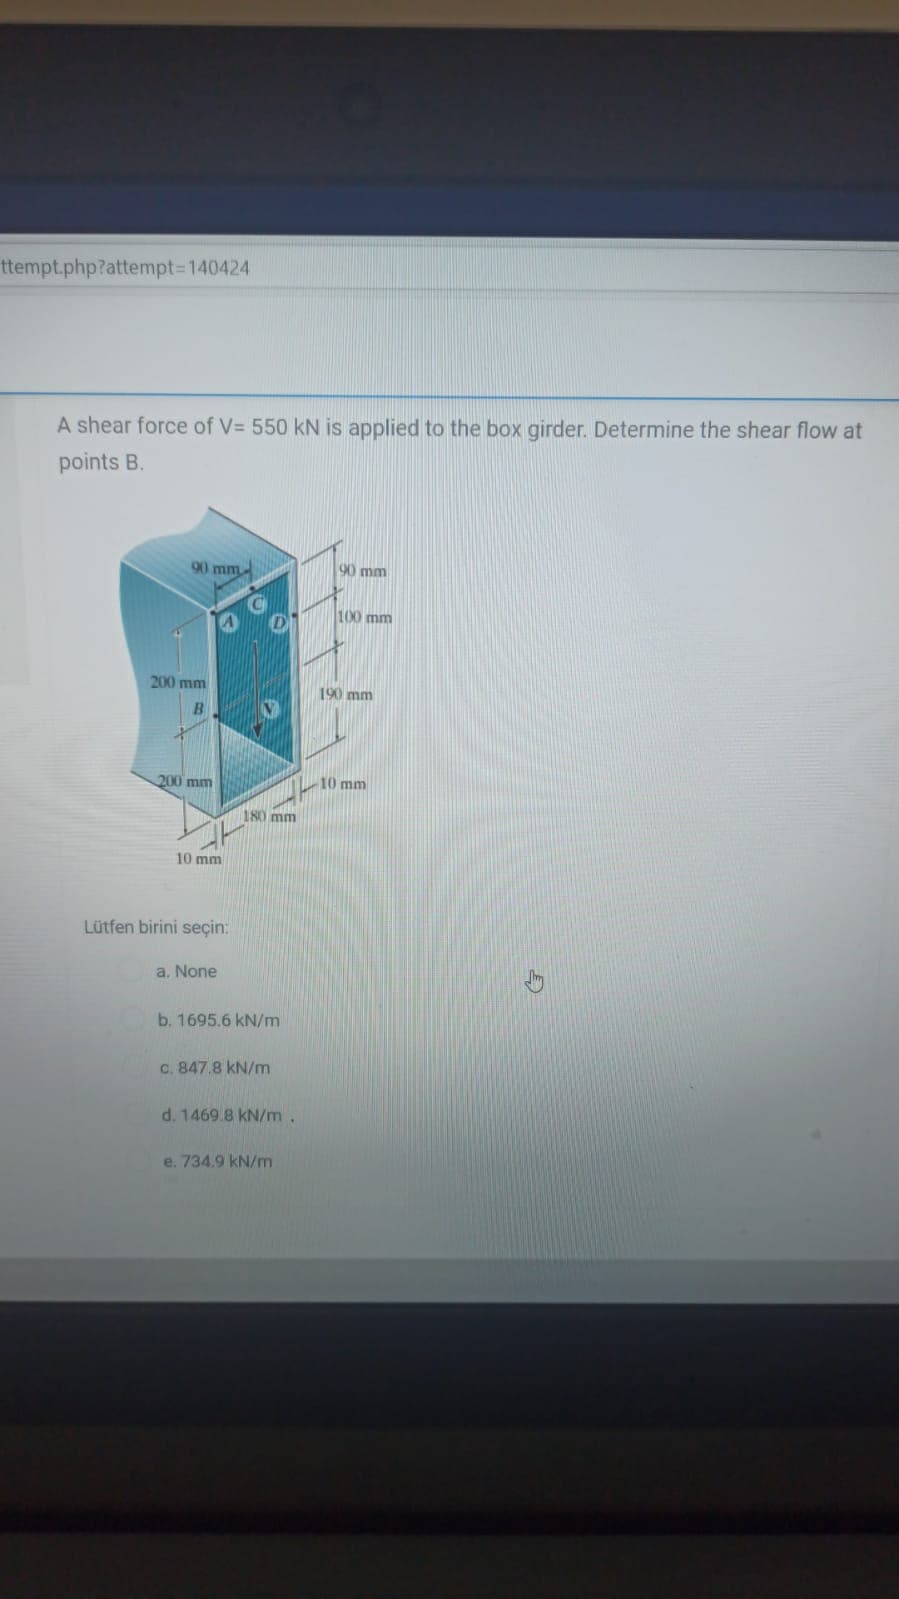 ttempt.php?attempt=140424
A shear force of V= 550 kN is applied to the box girder. Determine the shear flow at
points B.
90 mm
90 mm
100 mm
200 mm
190 mm
B
200 mm
10 mm
180 mm
10 mm
Lütfen birini seçin:
a. None
b. 1695.6 kN/m
C. 847.8 kN/m
d. 1469.8 kN/m.
e. 734.9 kN/m
